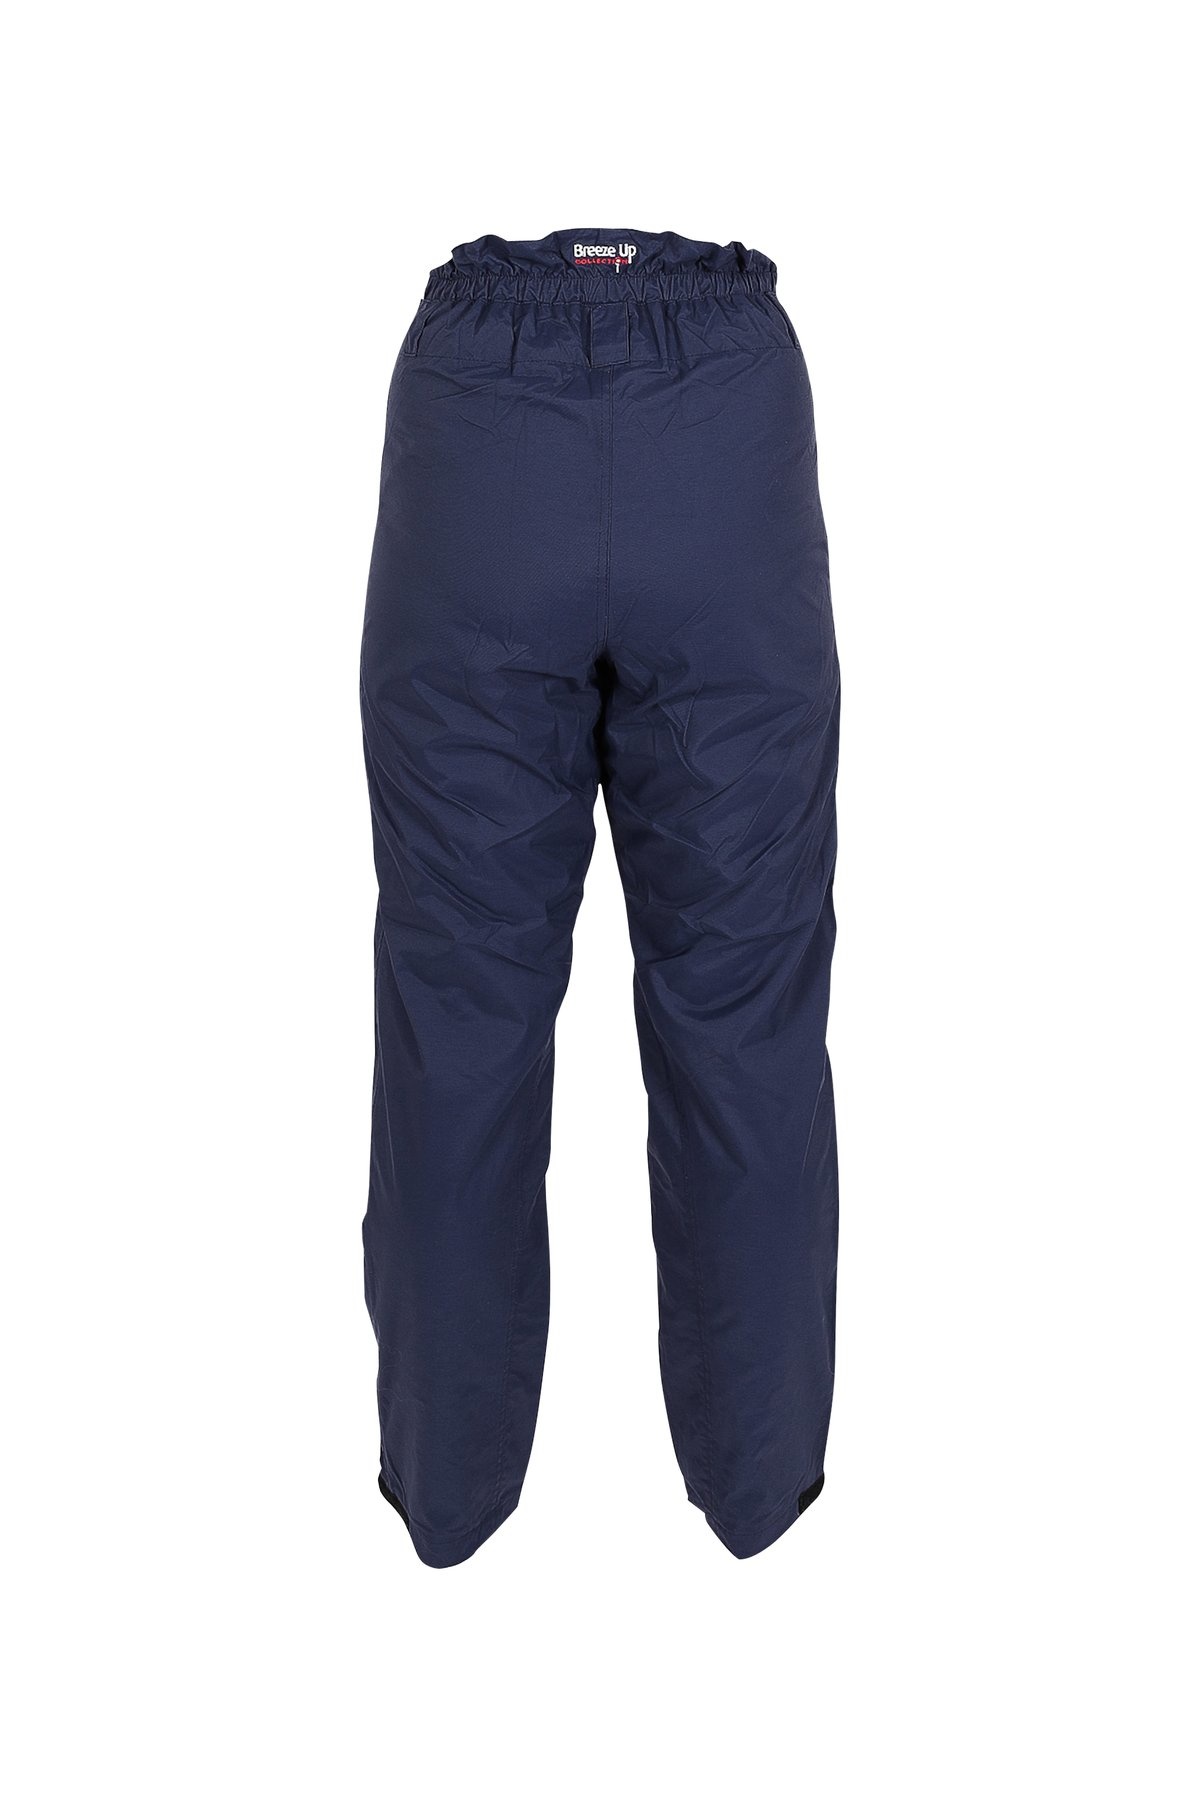 Breeze Up Waterproof Trousers NAVY - Forever Equestrian Tack and ...